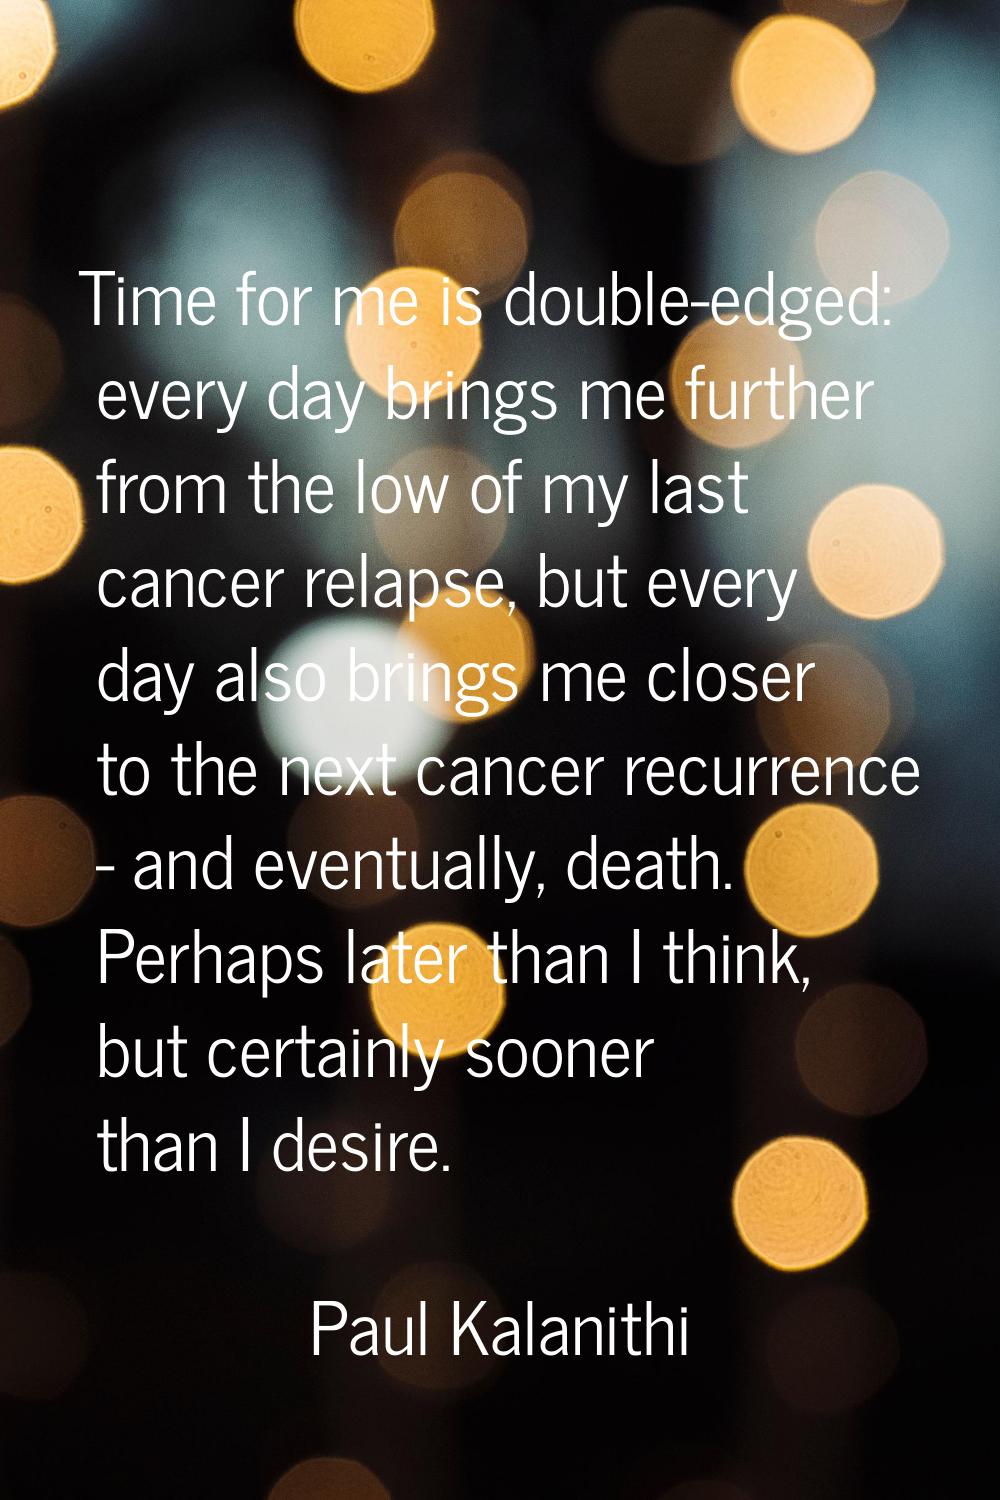 Time for me is double-edged: every day brings me further from the low of my last cancer relapse, bu